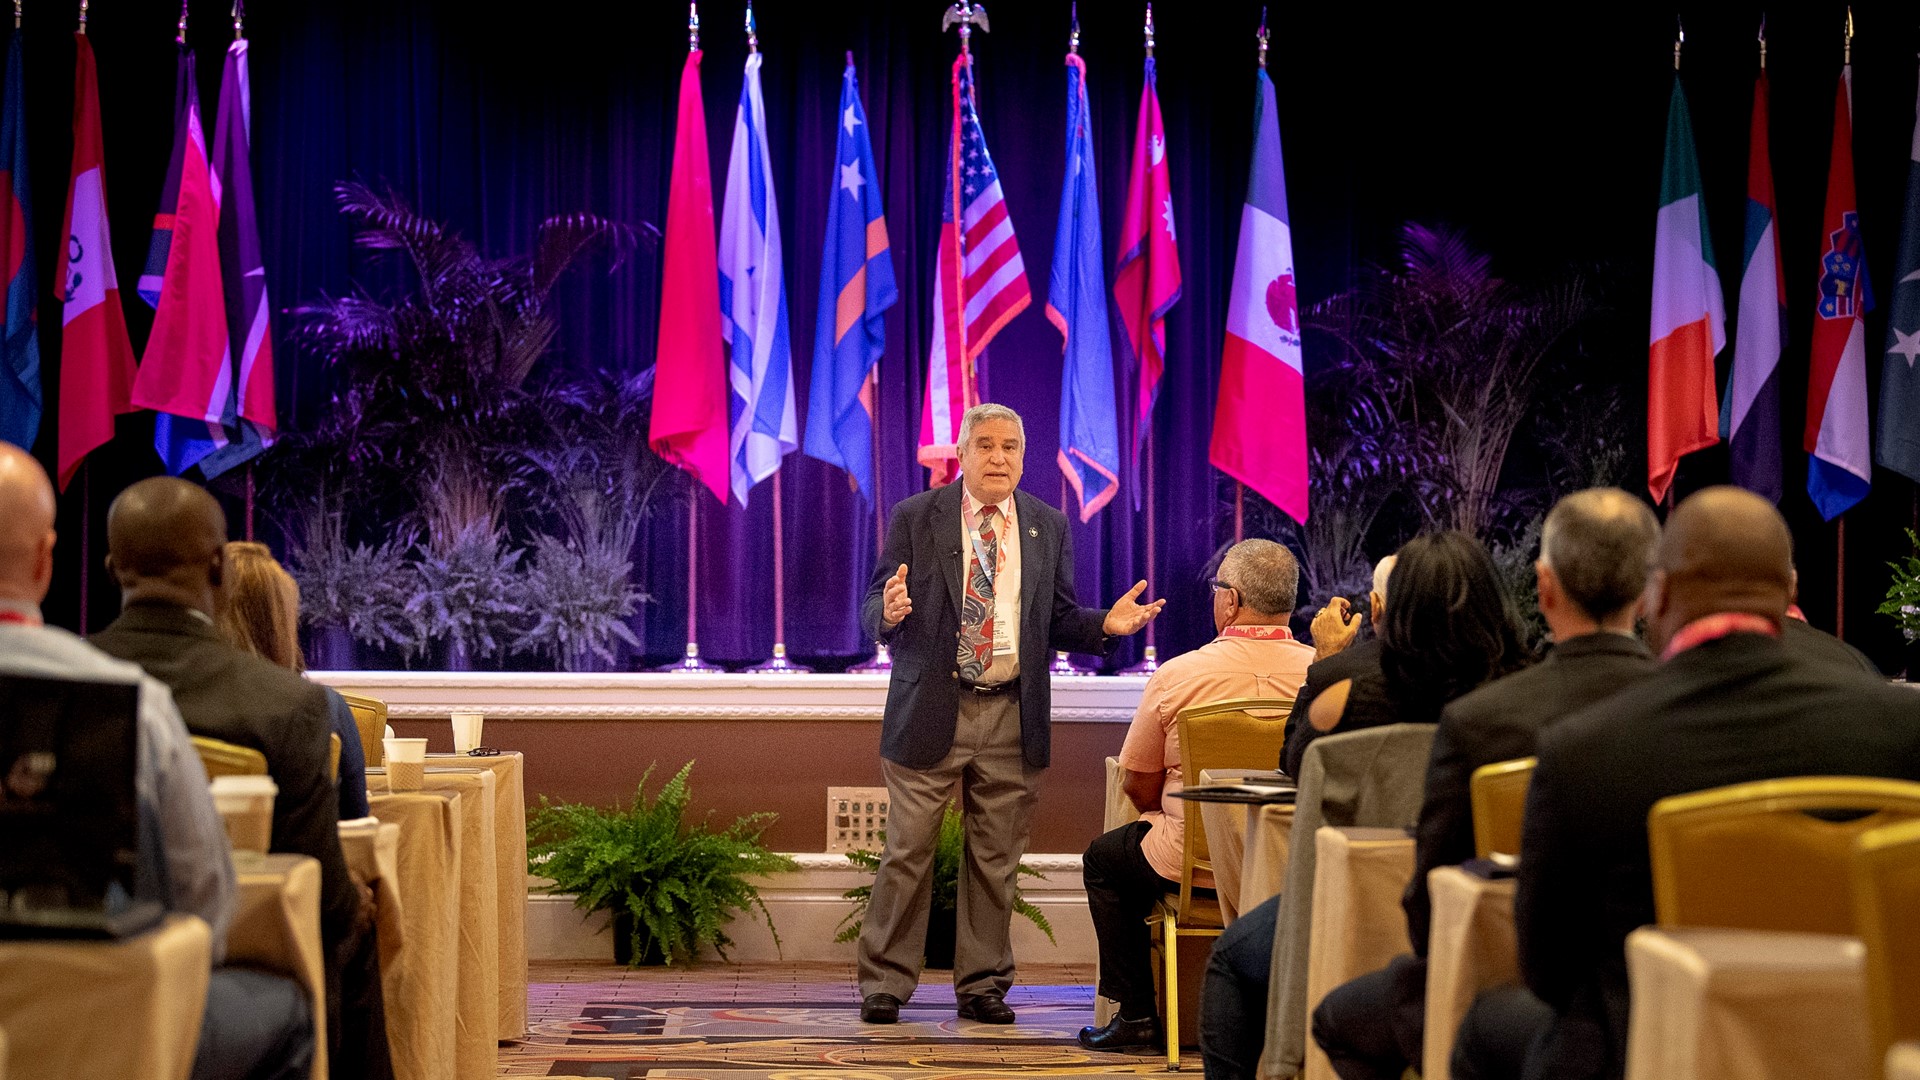 Peter E. Tarlow. Ph.D., president of Tourism & More, Inc., speaks at the International Tourism Security Conference